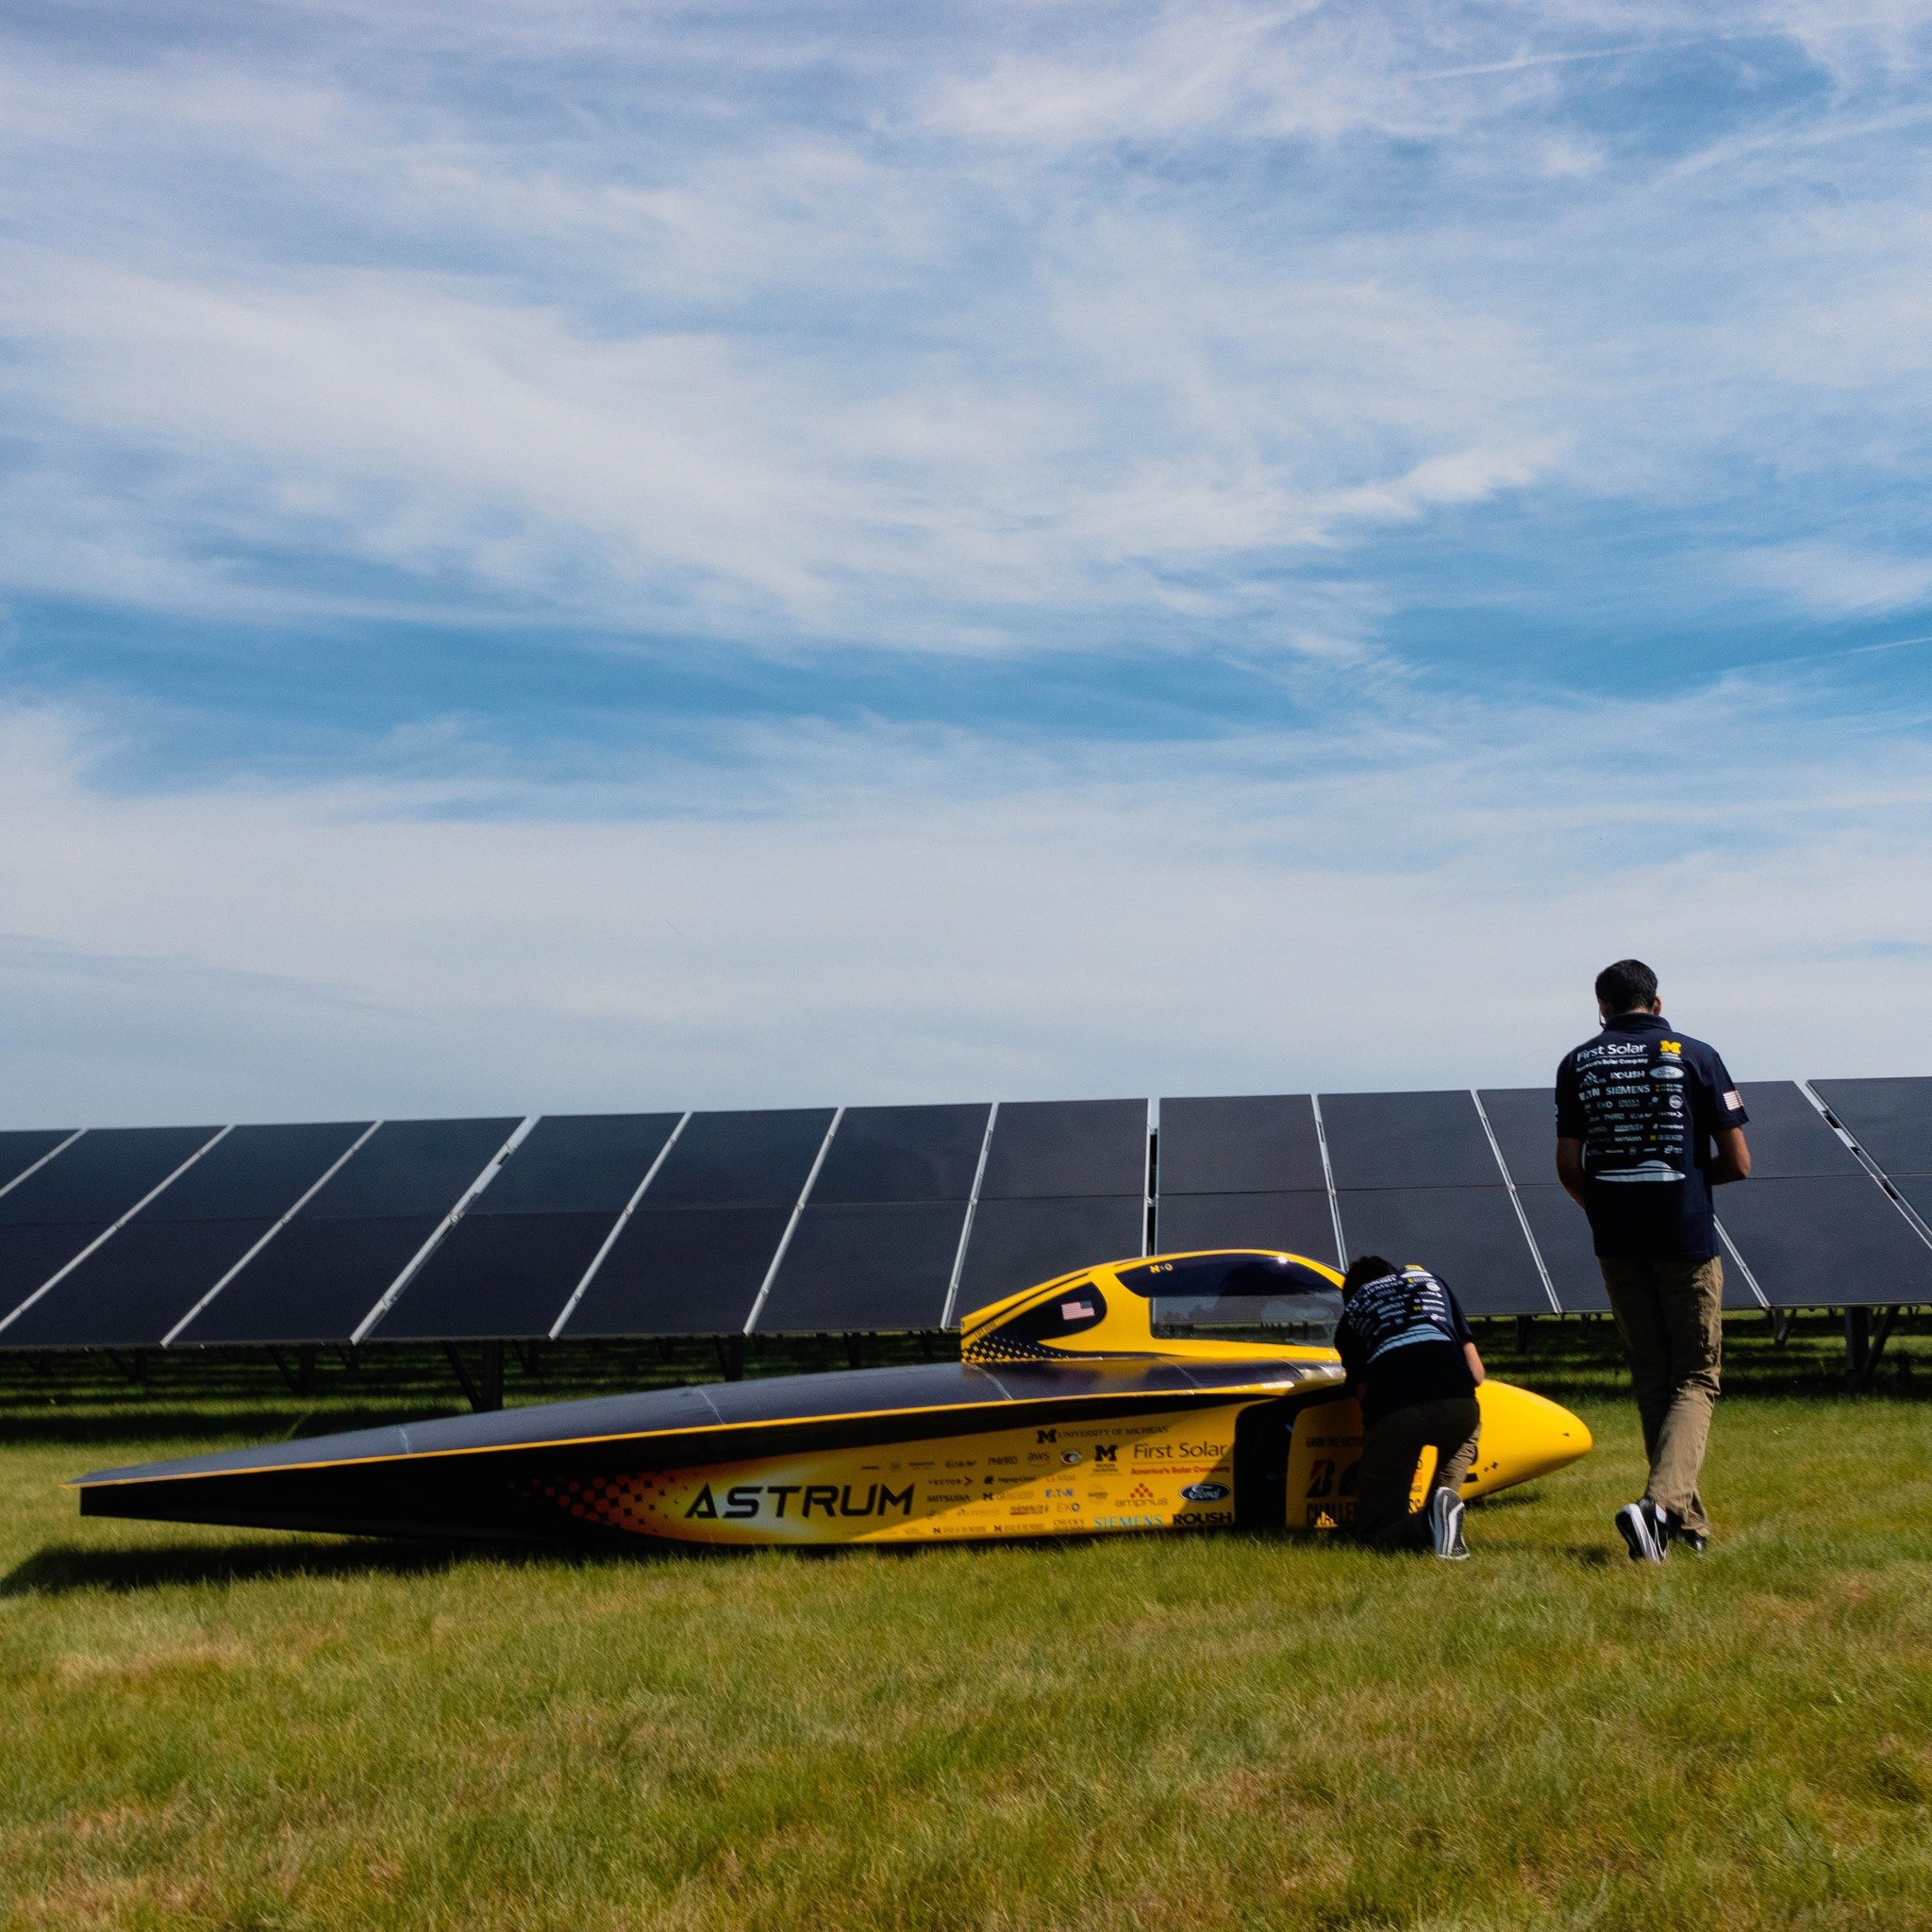 Happy Earth Day from our solar car team! When we race, we're not just racing towards the finish line, but towards a brighter, greener future for our planet. Let's harness the power of the sun to pave the way for sustainable transportation and a clean